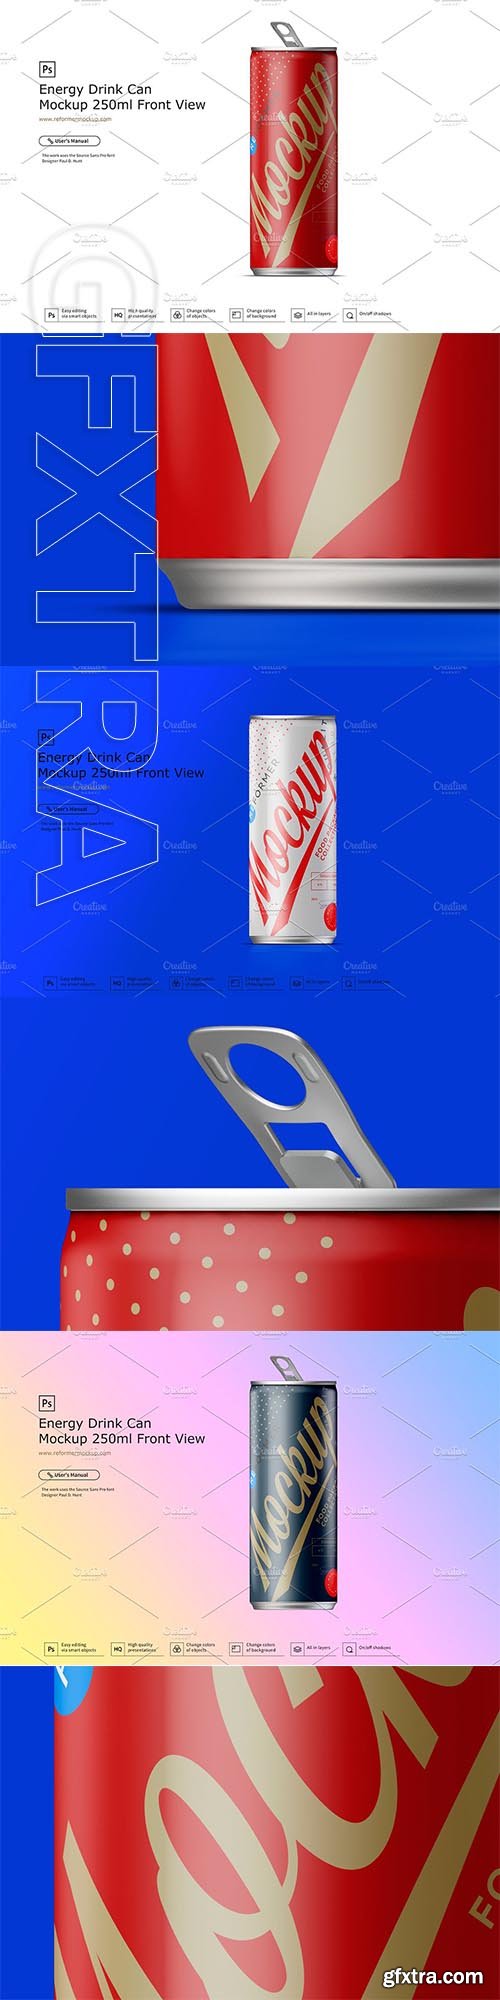 CreativeMarket - Energy Drink Can Mockup 250ml Front View 3592608